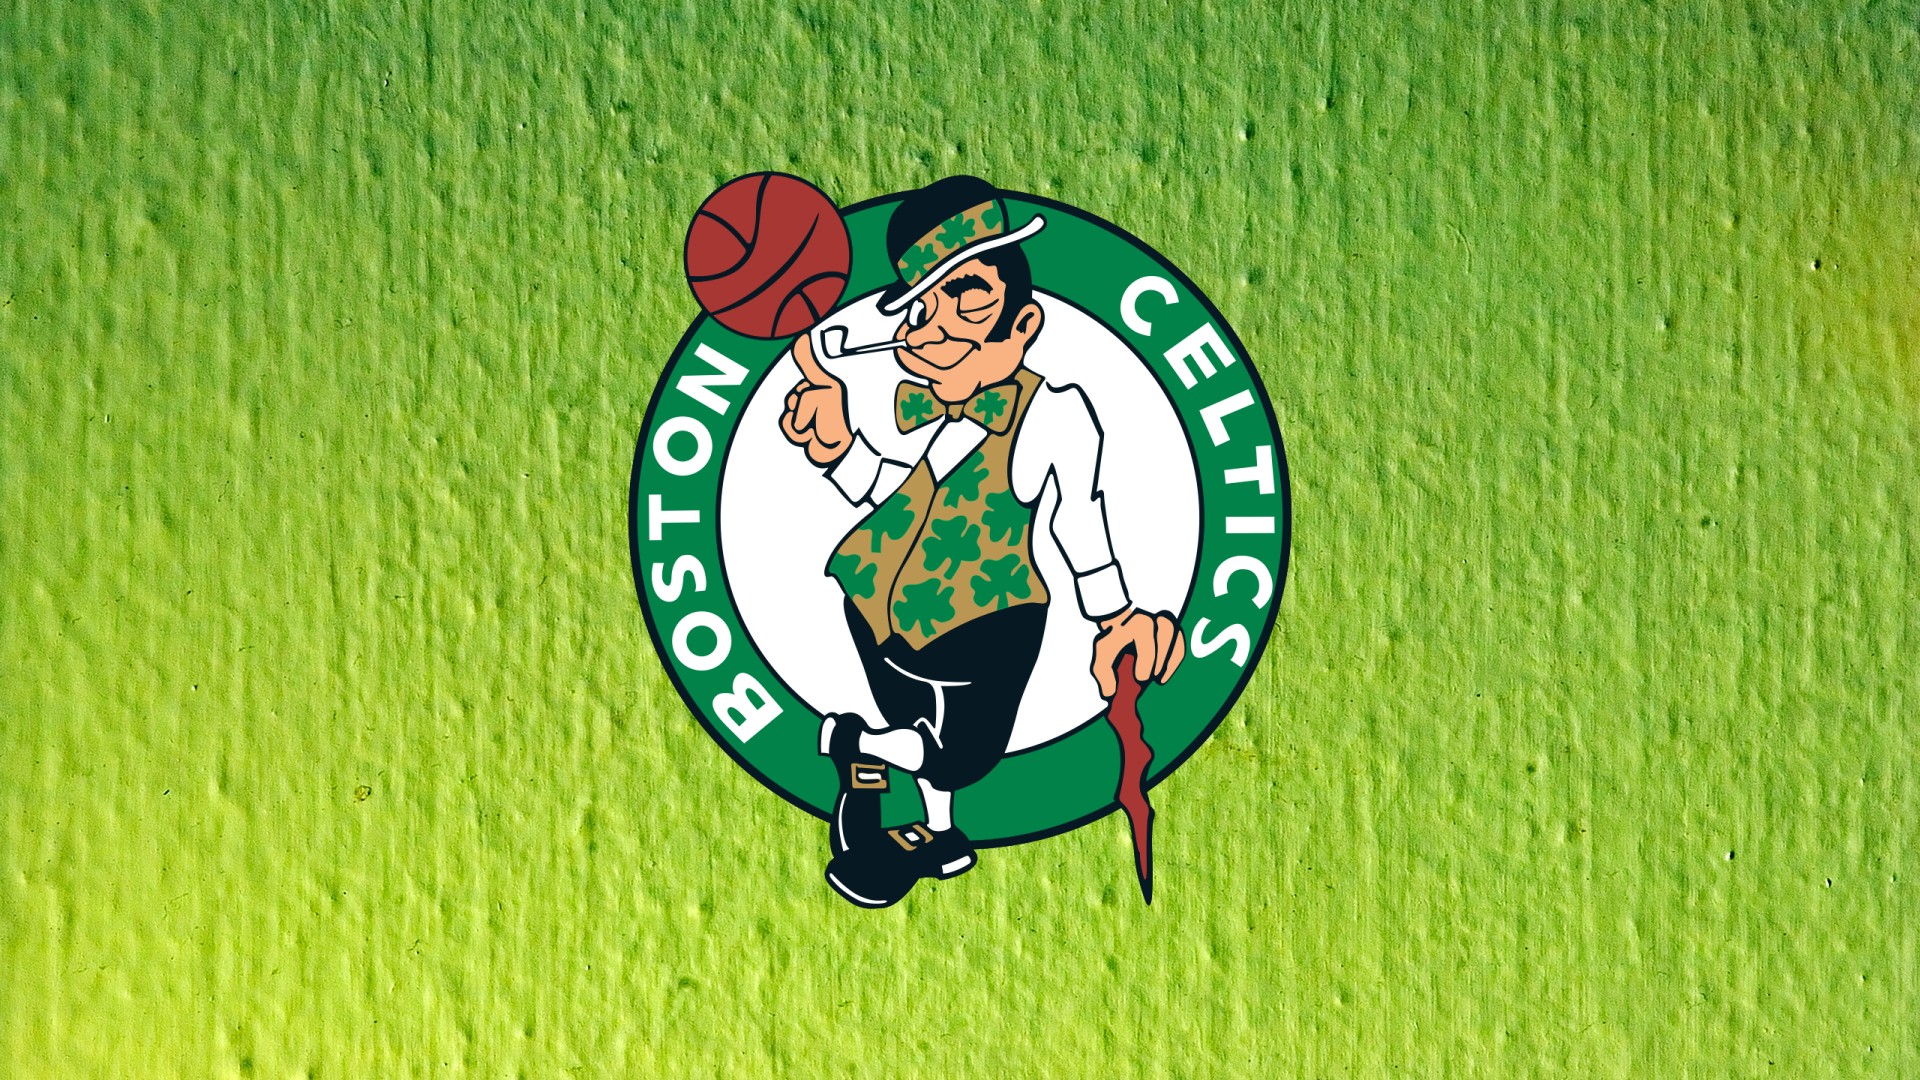 Wallpaper Boston Celtics HD With Resolution 1920X1080 pixel. You can make this wallpaper for your Desktop Computer Backgrounds, Mac Wallpapers, Android Lock screen or iPhone Screensavers